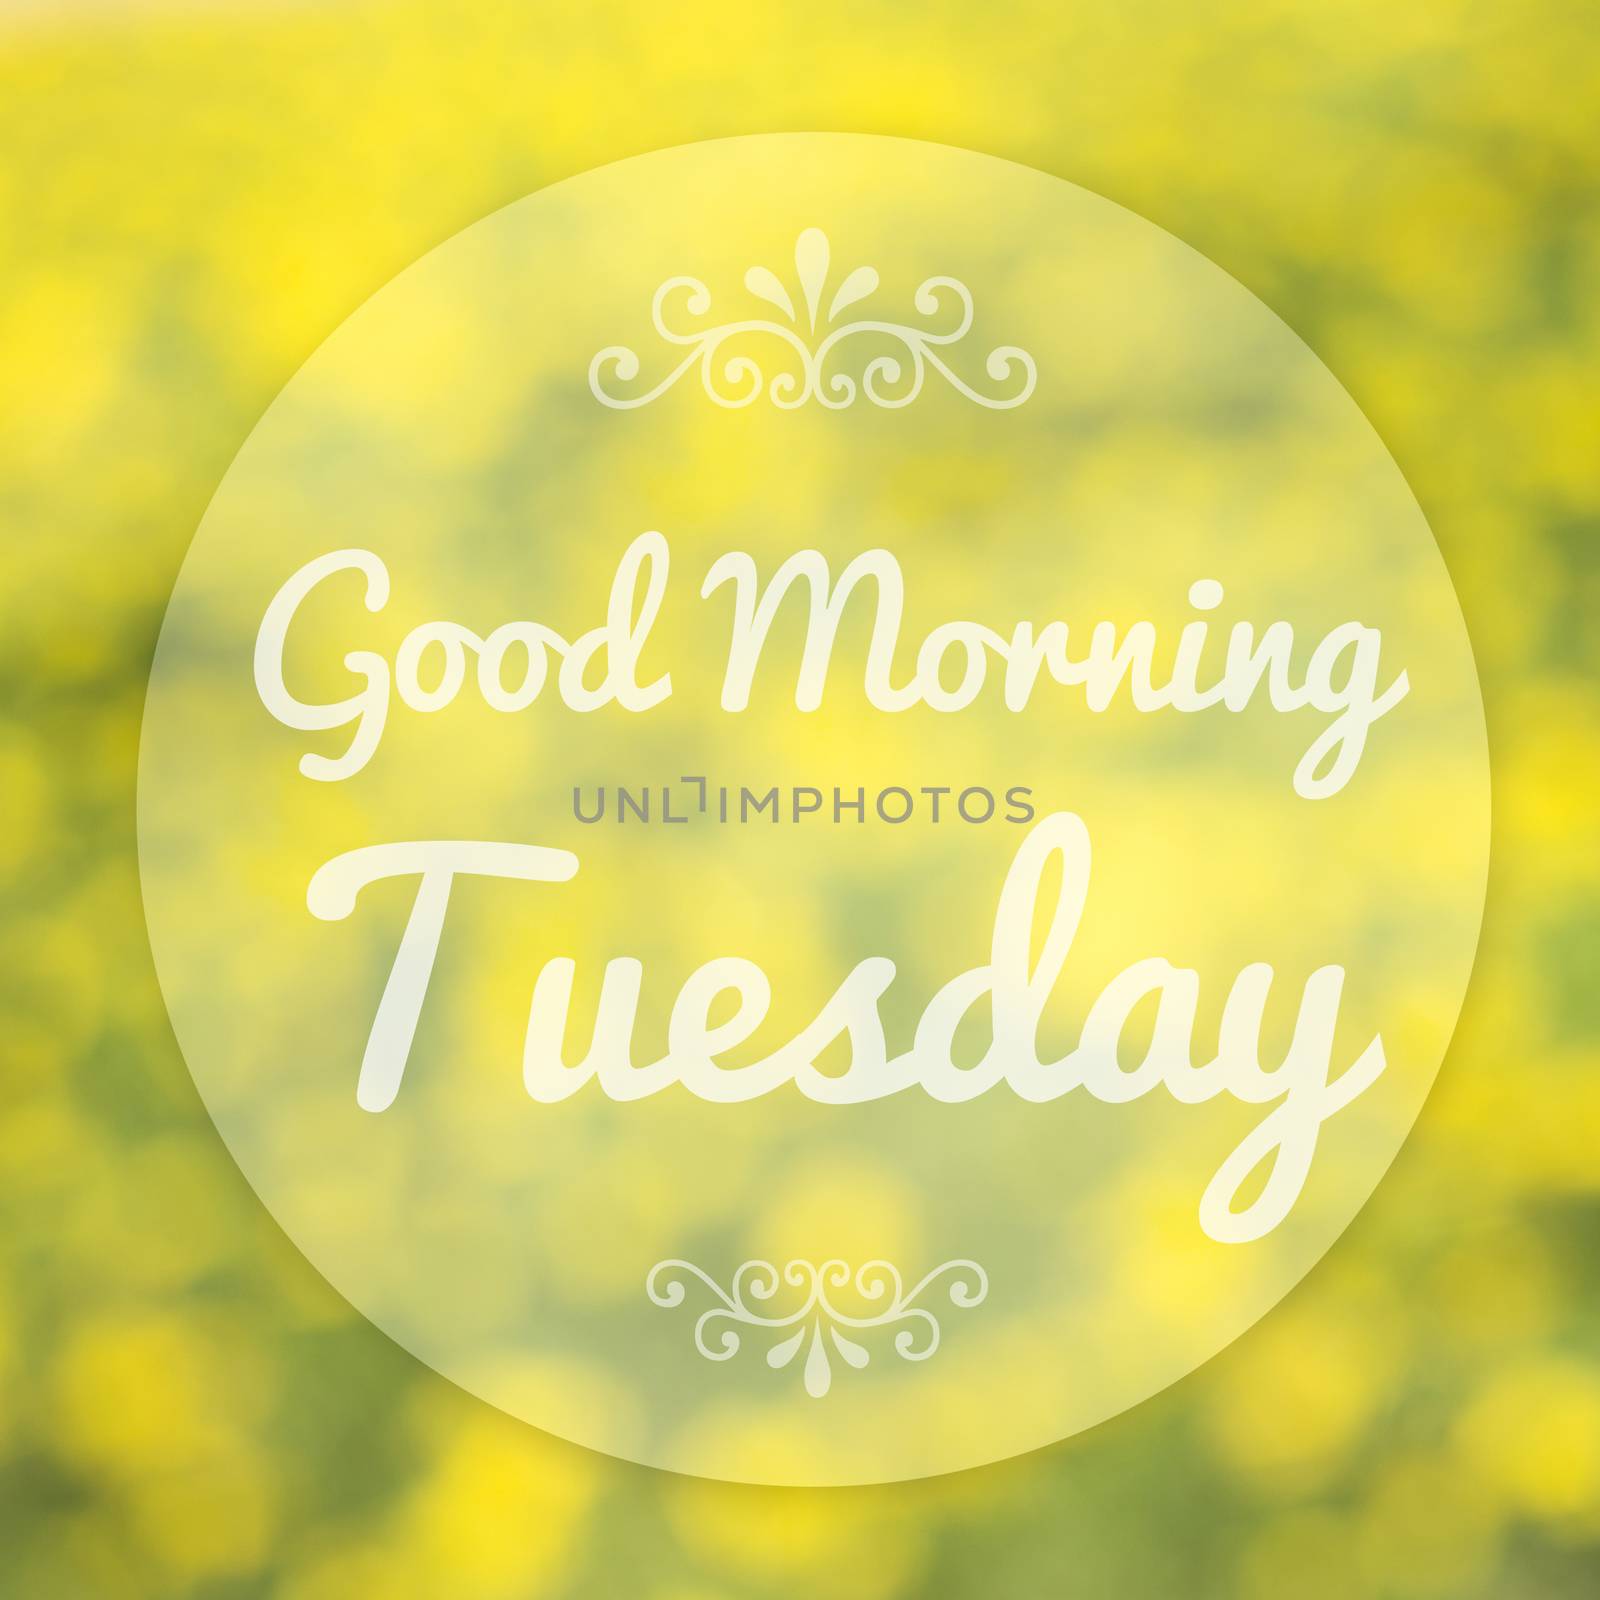 Good Morning Tuesday on blur background by 2nix